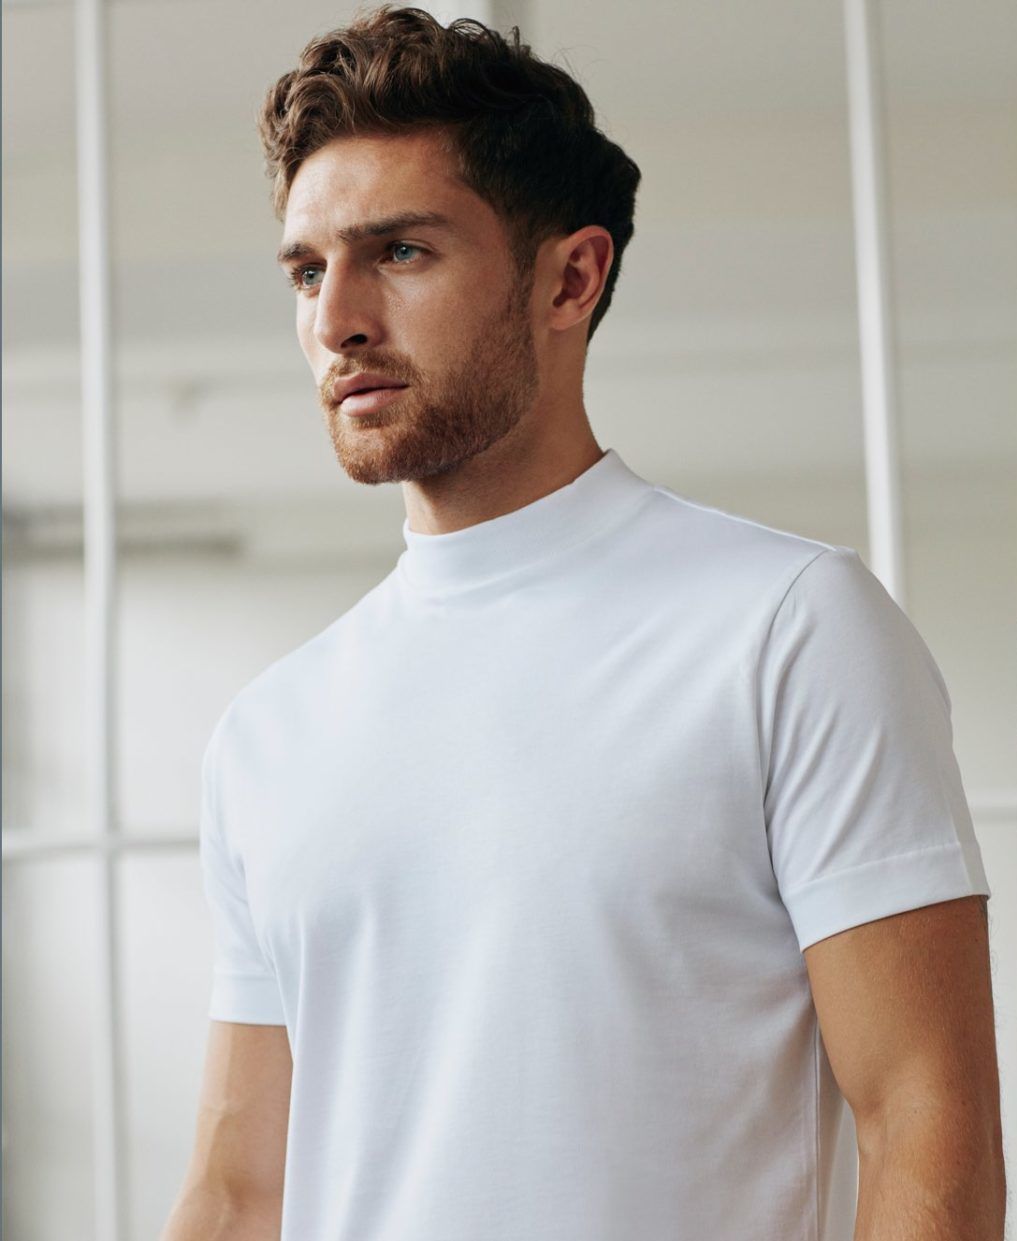 Back to basics: Top tee labels every man needs to bookmark